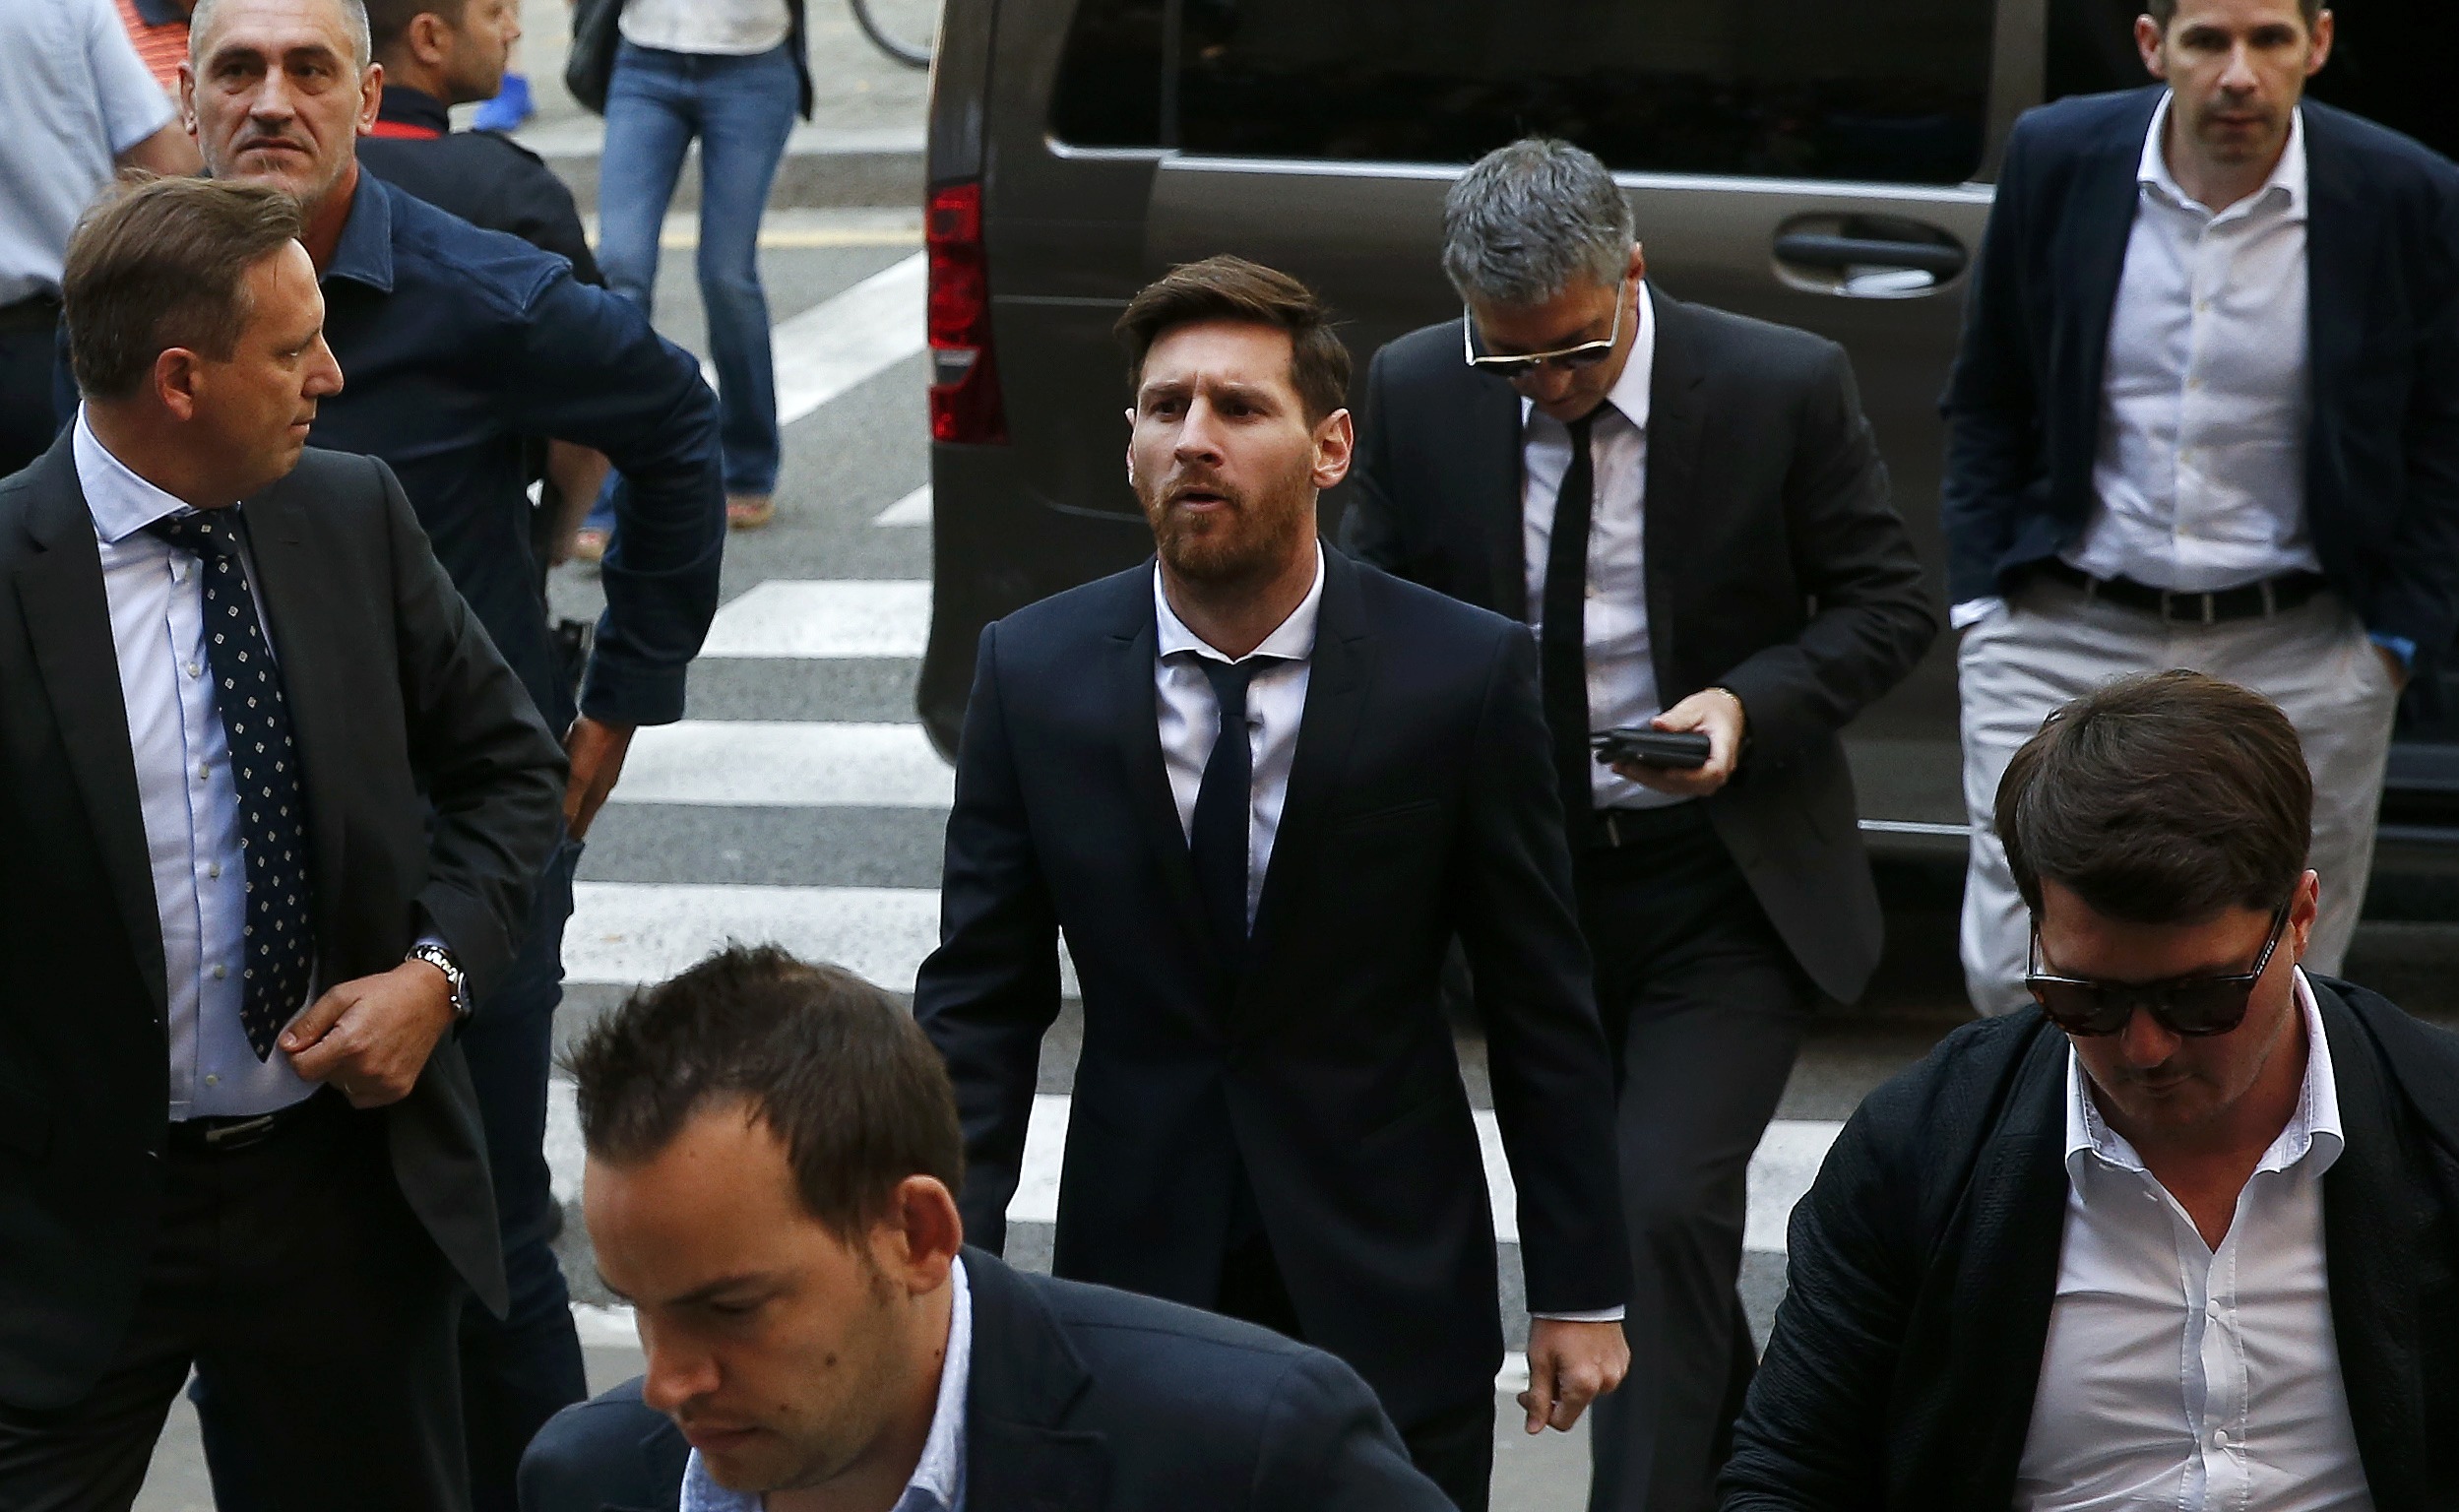 Barcelona's Argentine soccer player Lionel Messi (C) arrives to court with his father Jorge Horacio Messi (3rd R) to stand trial for tax fraud in Barcelona, Spain, June 2, 2016. REUTERS/Albert Gea